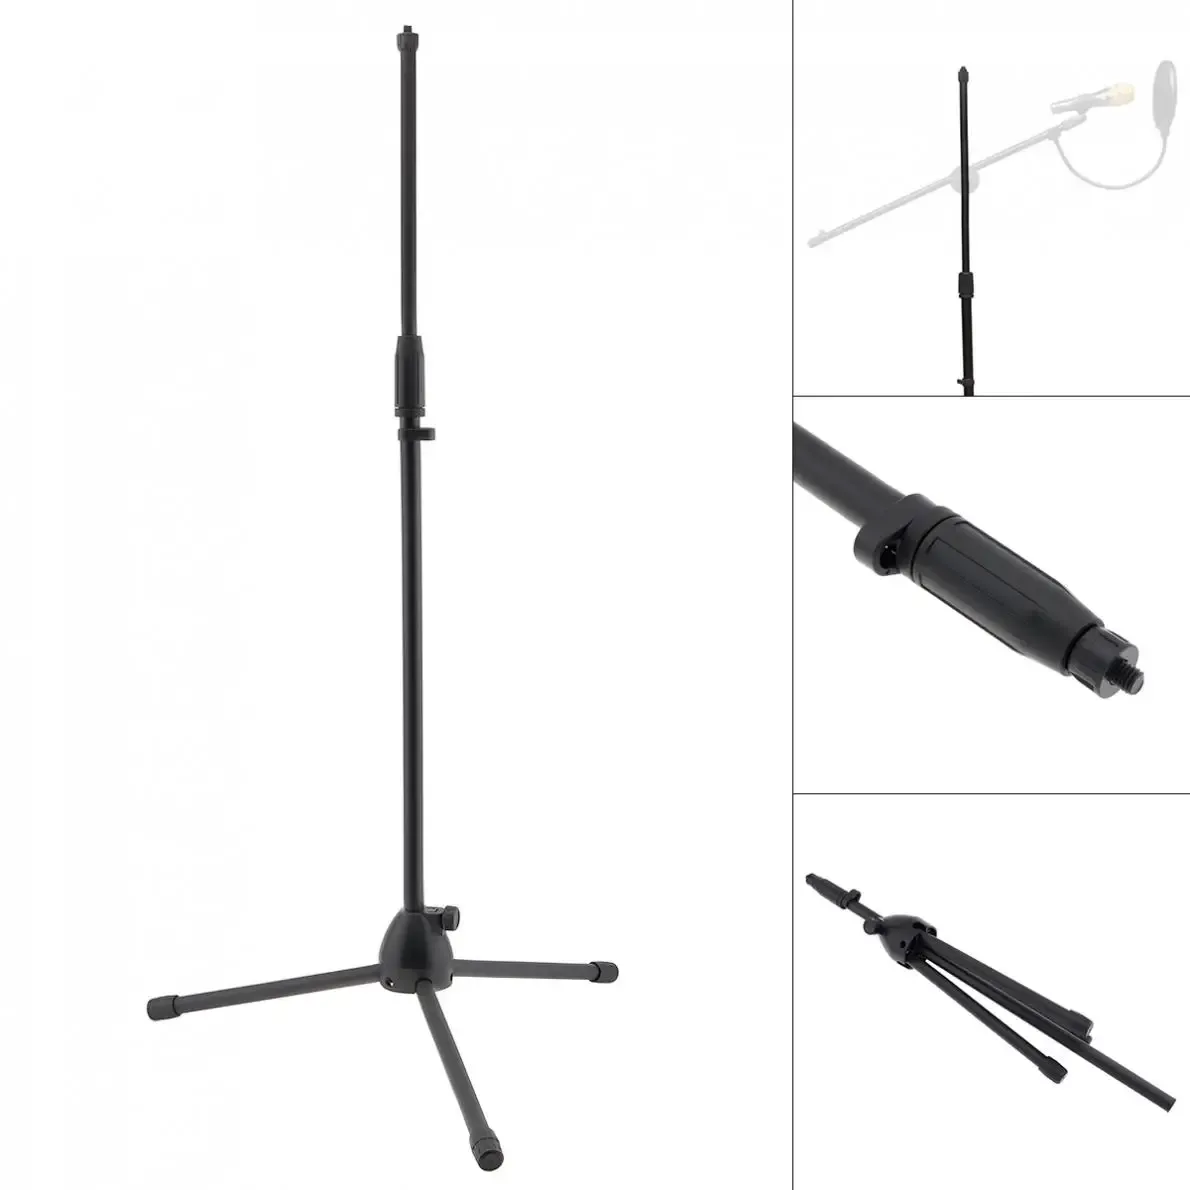 Accessories Live Floor Metal Stand / Microphone Holder / Microphone Stand Adjustable Stage Tripod for Studio Microphone Isolation Cover